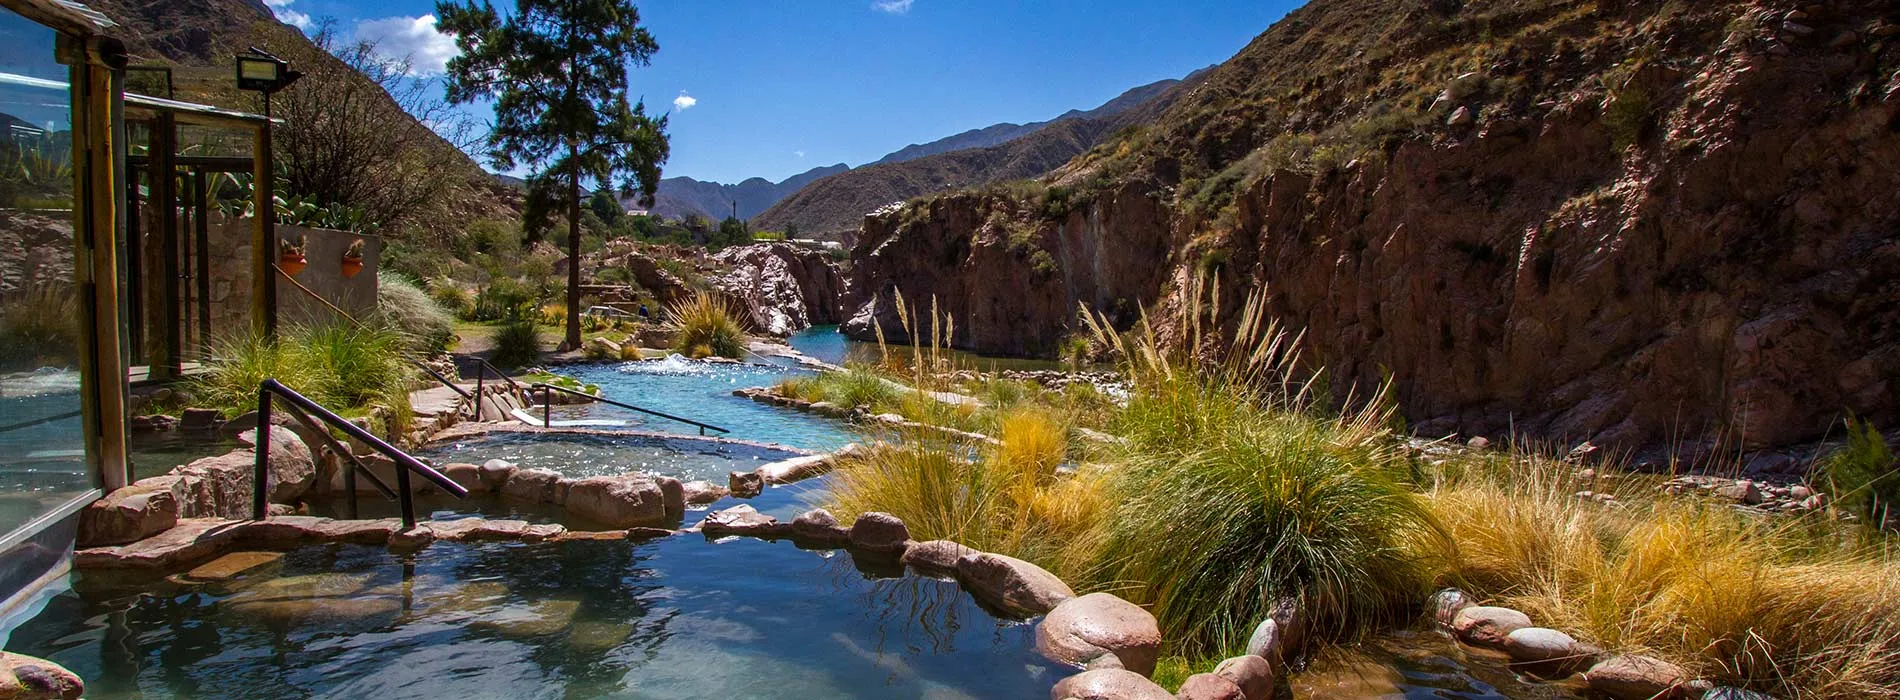 Hotel & Spa Termas Cacheuta in Argentina, South America | Hot Springs & Pools,SPAs - Rated 5.1